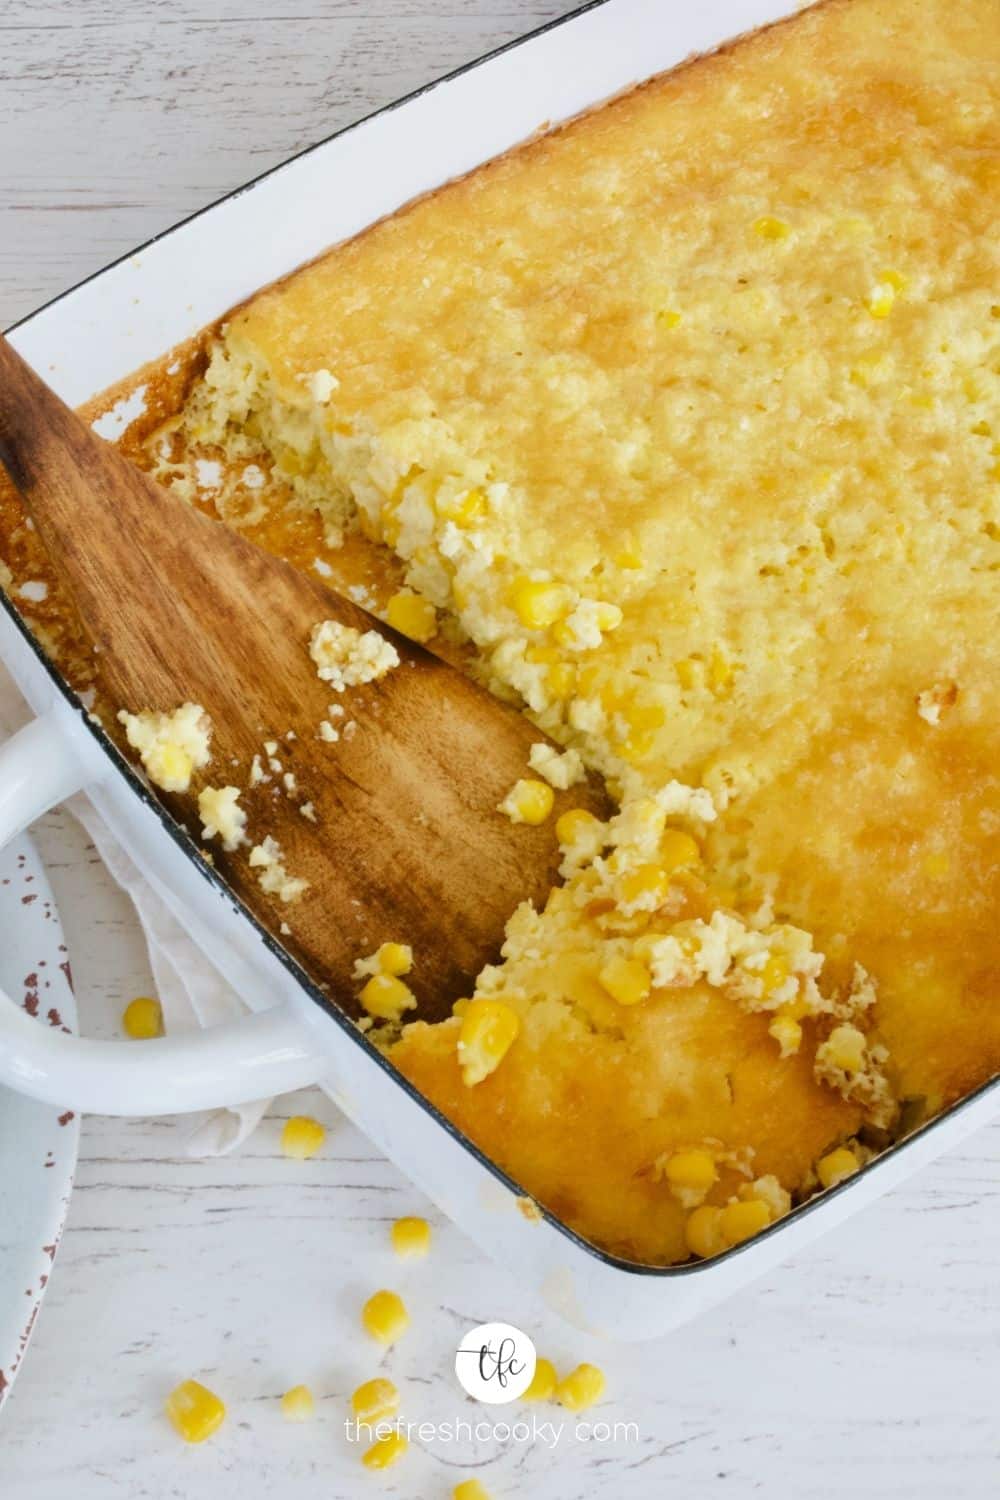 Serving corn pudding with wooden spatula.